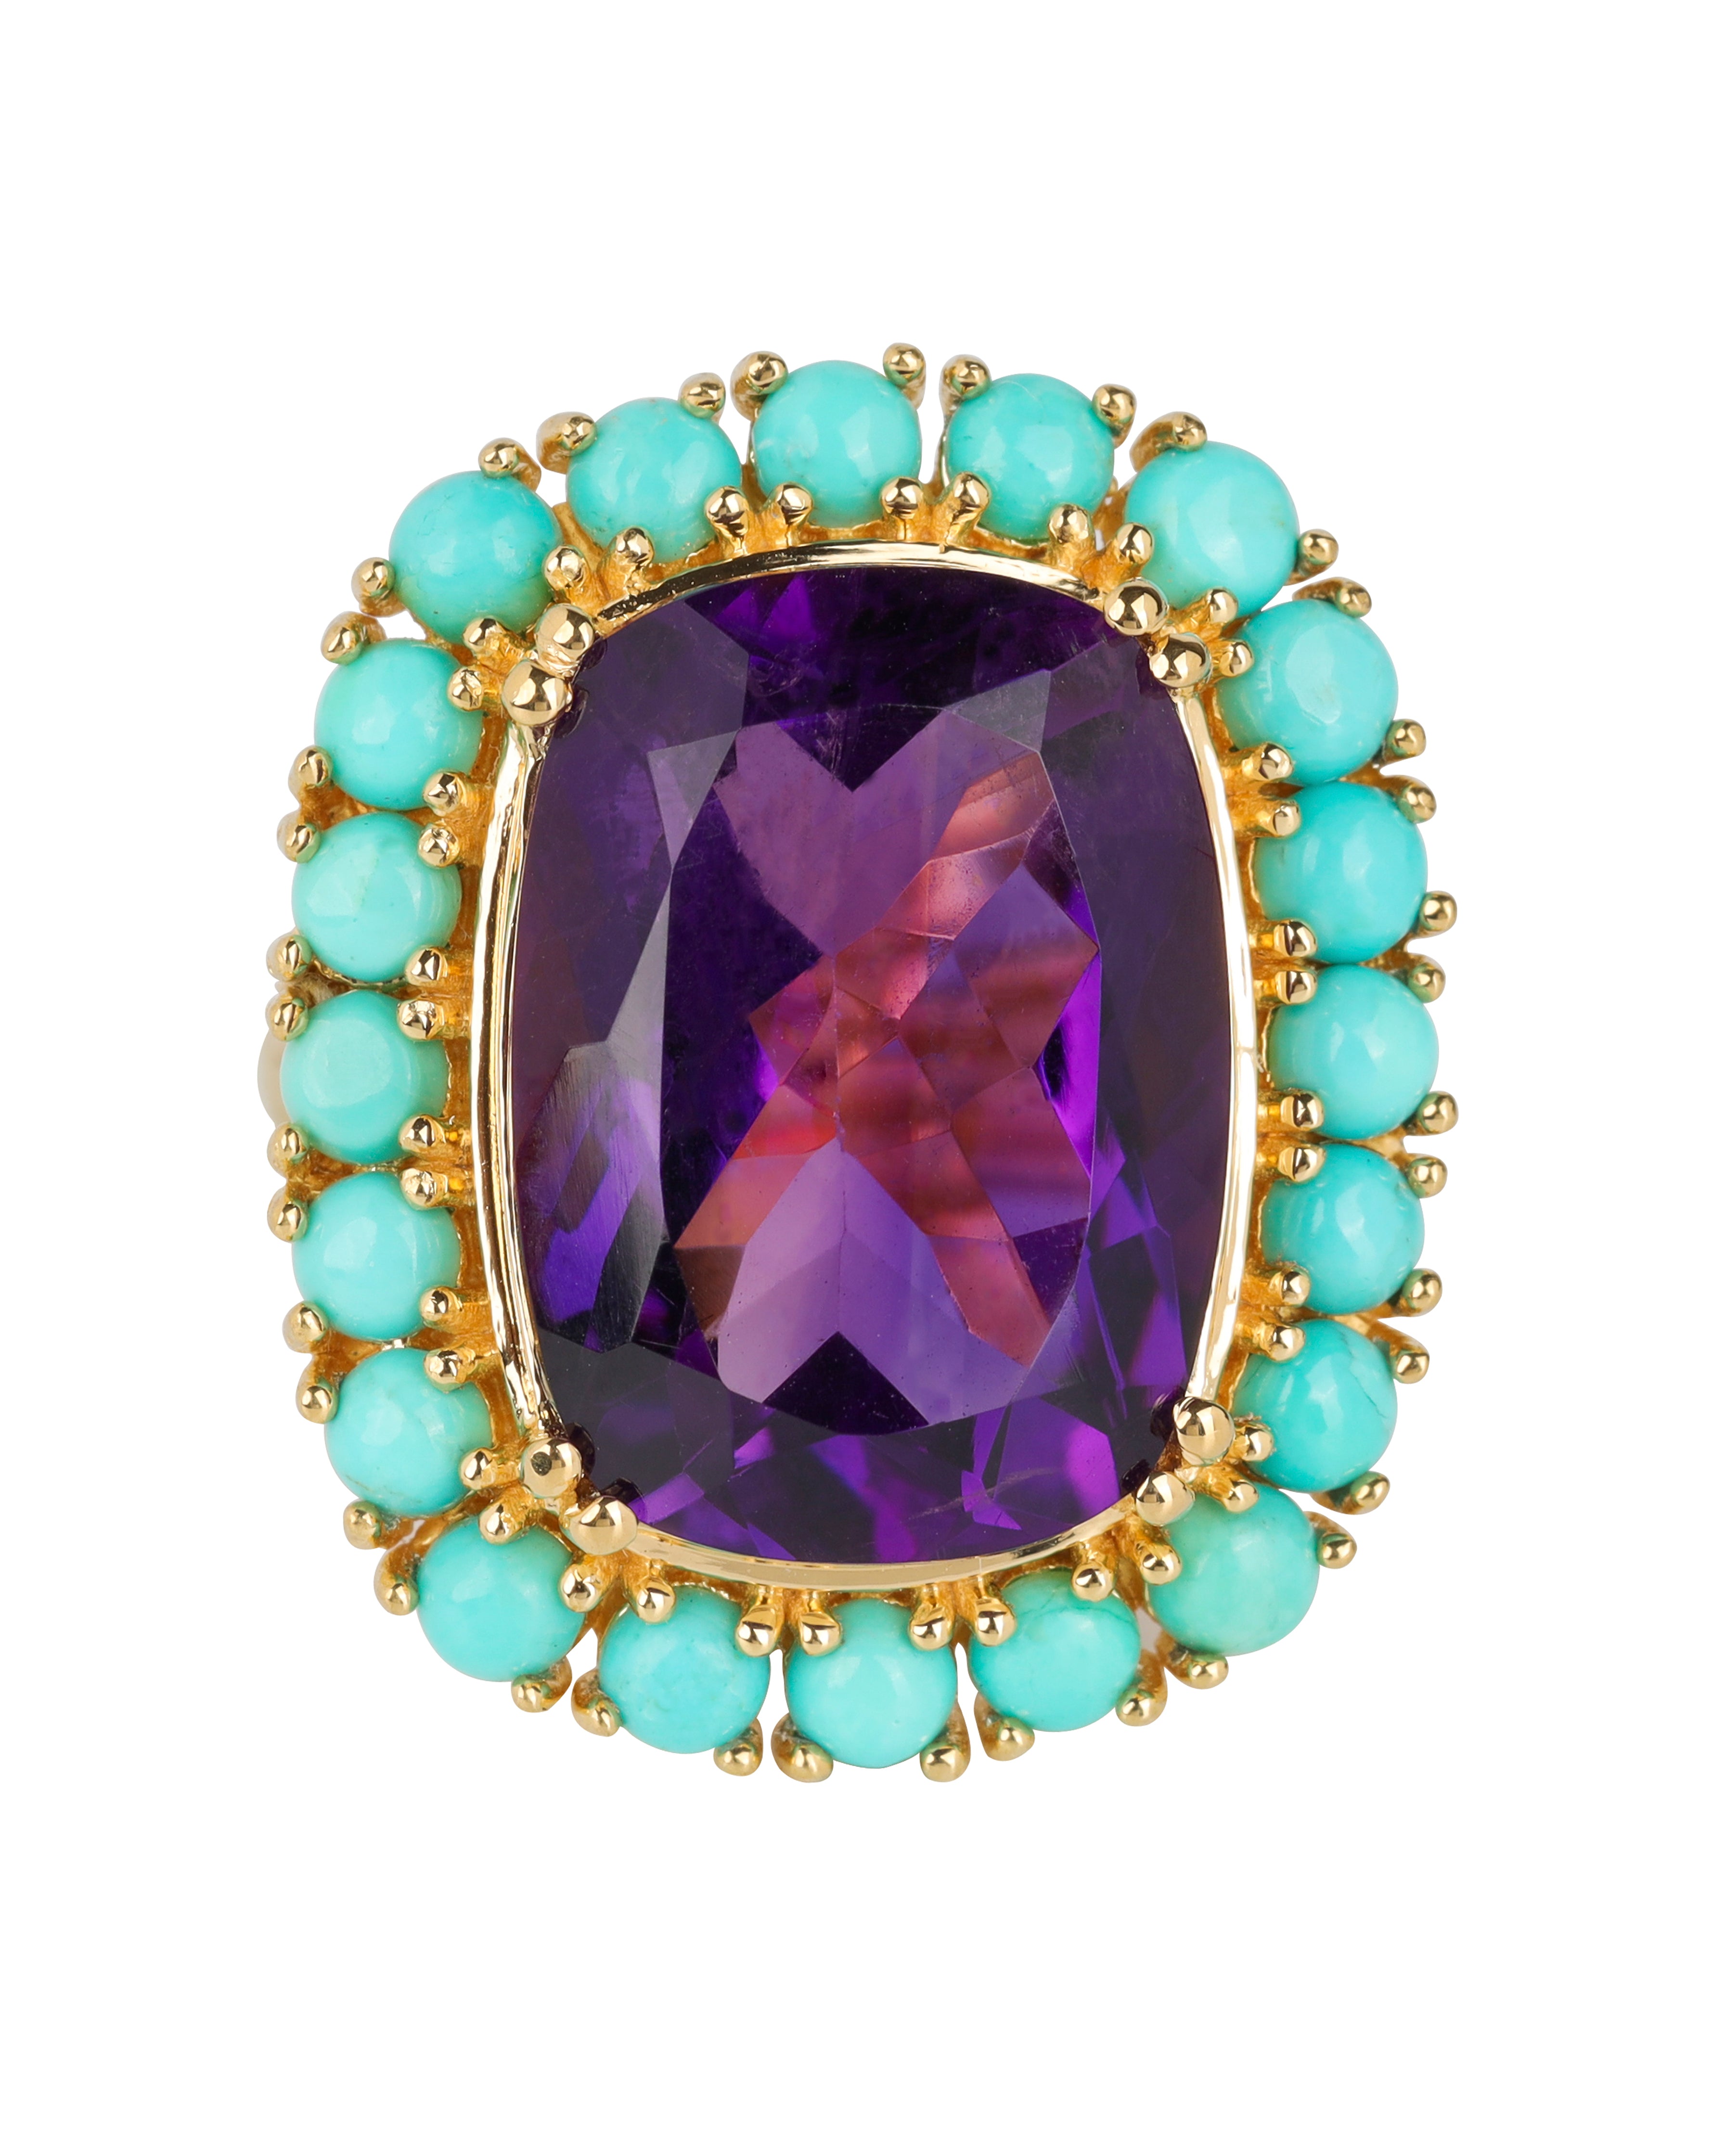 Buy Authentic February Birthstone Amethyst Jewelry, Rings & Necklaces